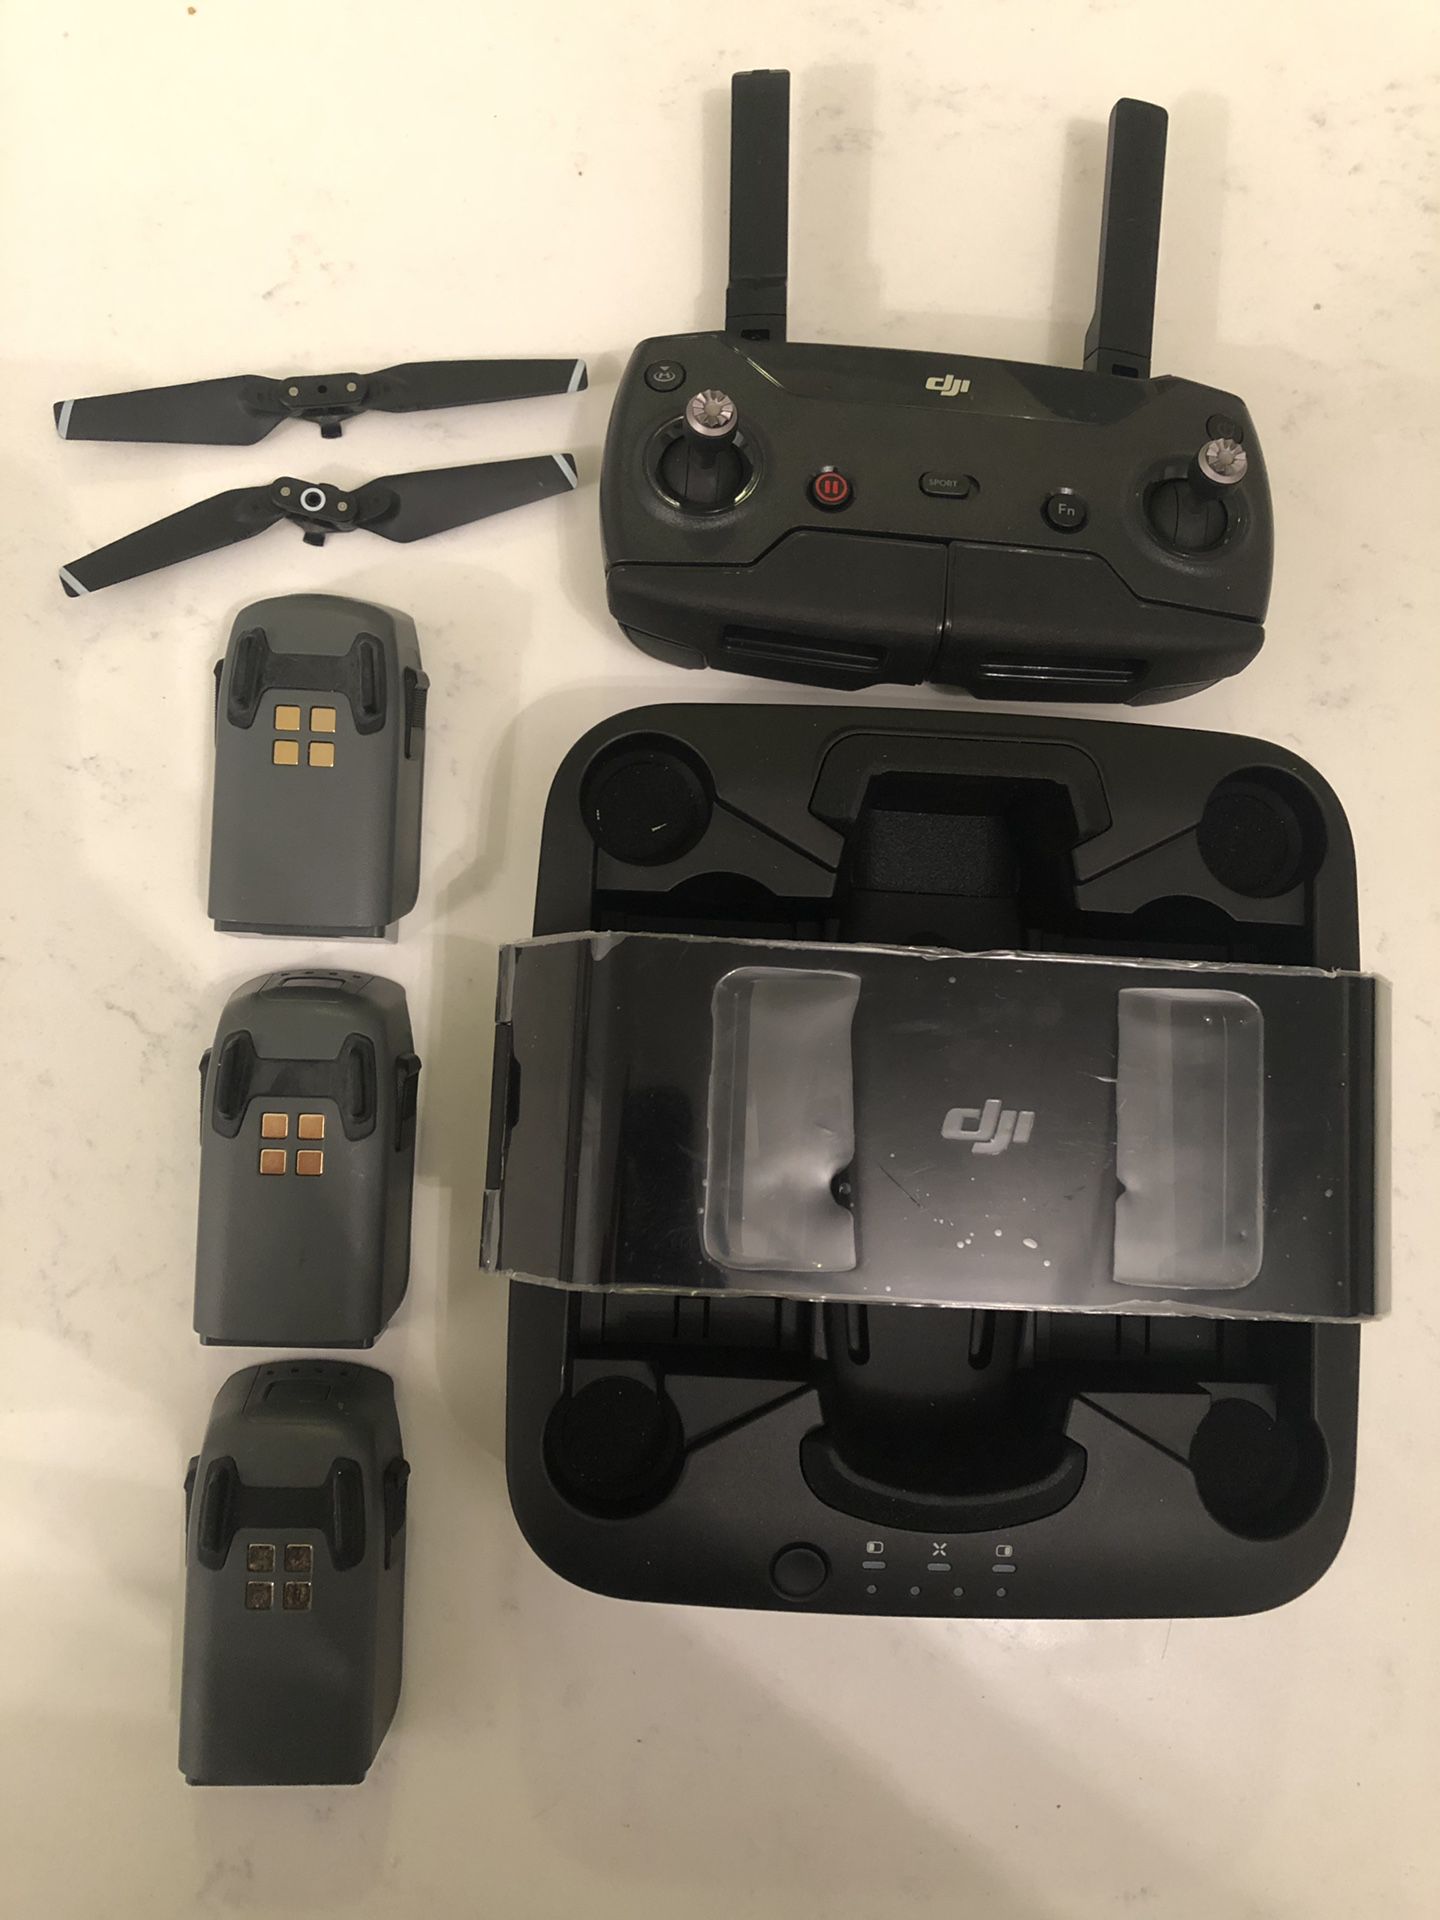 DJI spark drone equipment HAVE TO GO! MOVING***